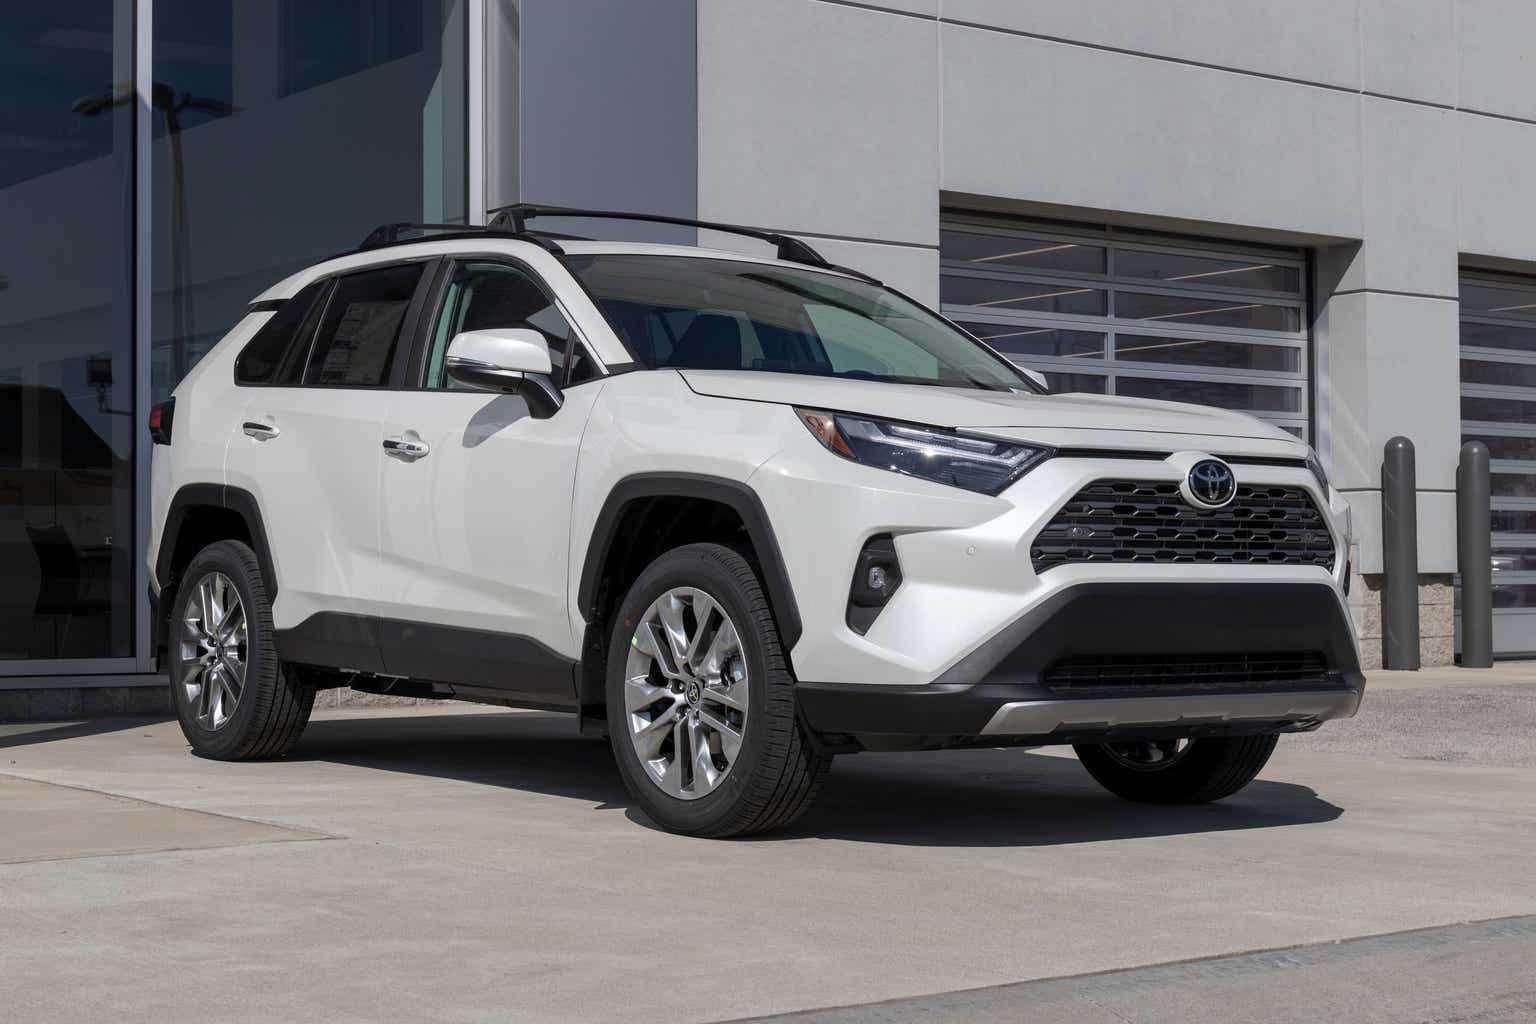 Hypothetical All-Electric Toyota RAV4 Returns to Fight Tesla